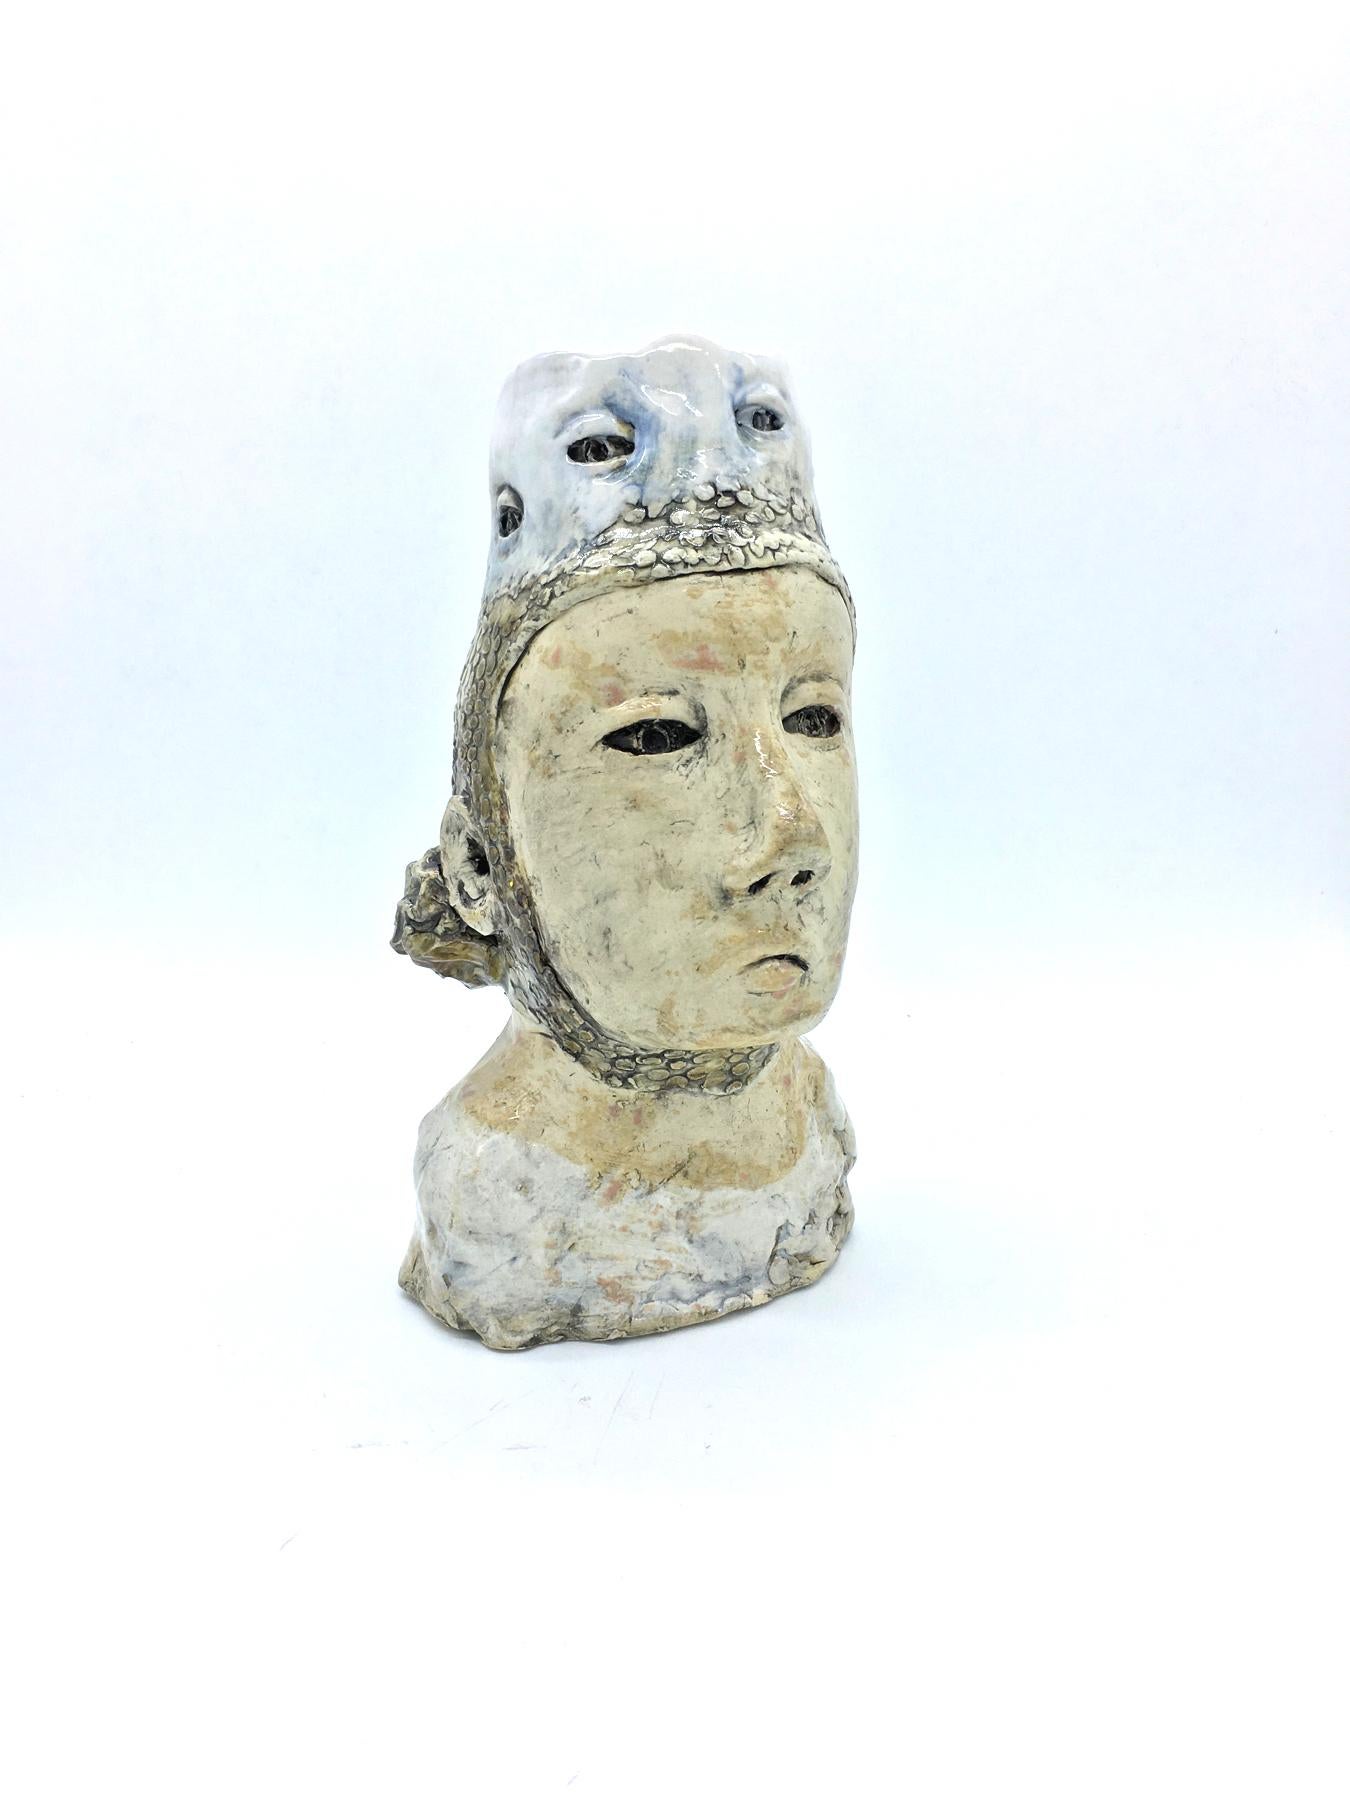 Ashley Benton Figurative Sculpture - Figurative ceramic sculpture: 'Once she could see she regretted looking'